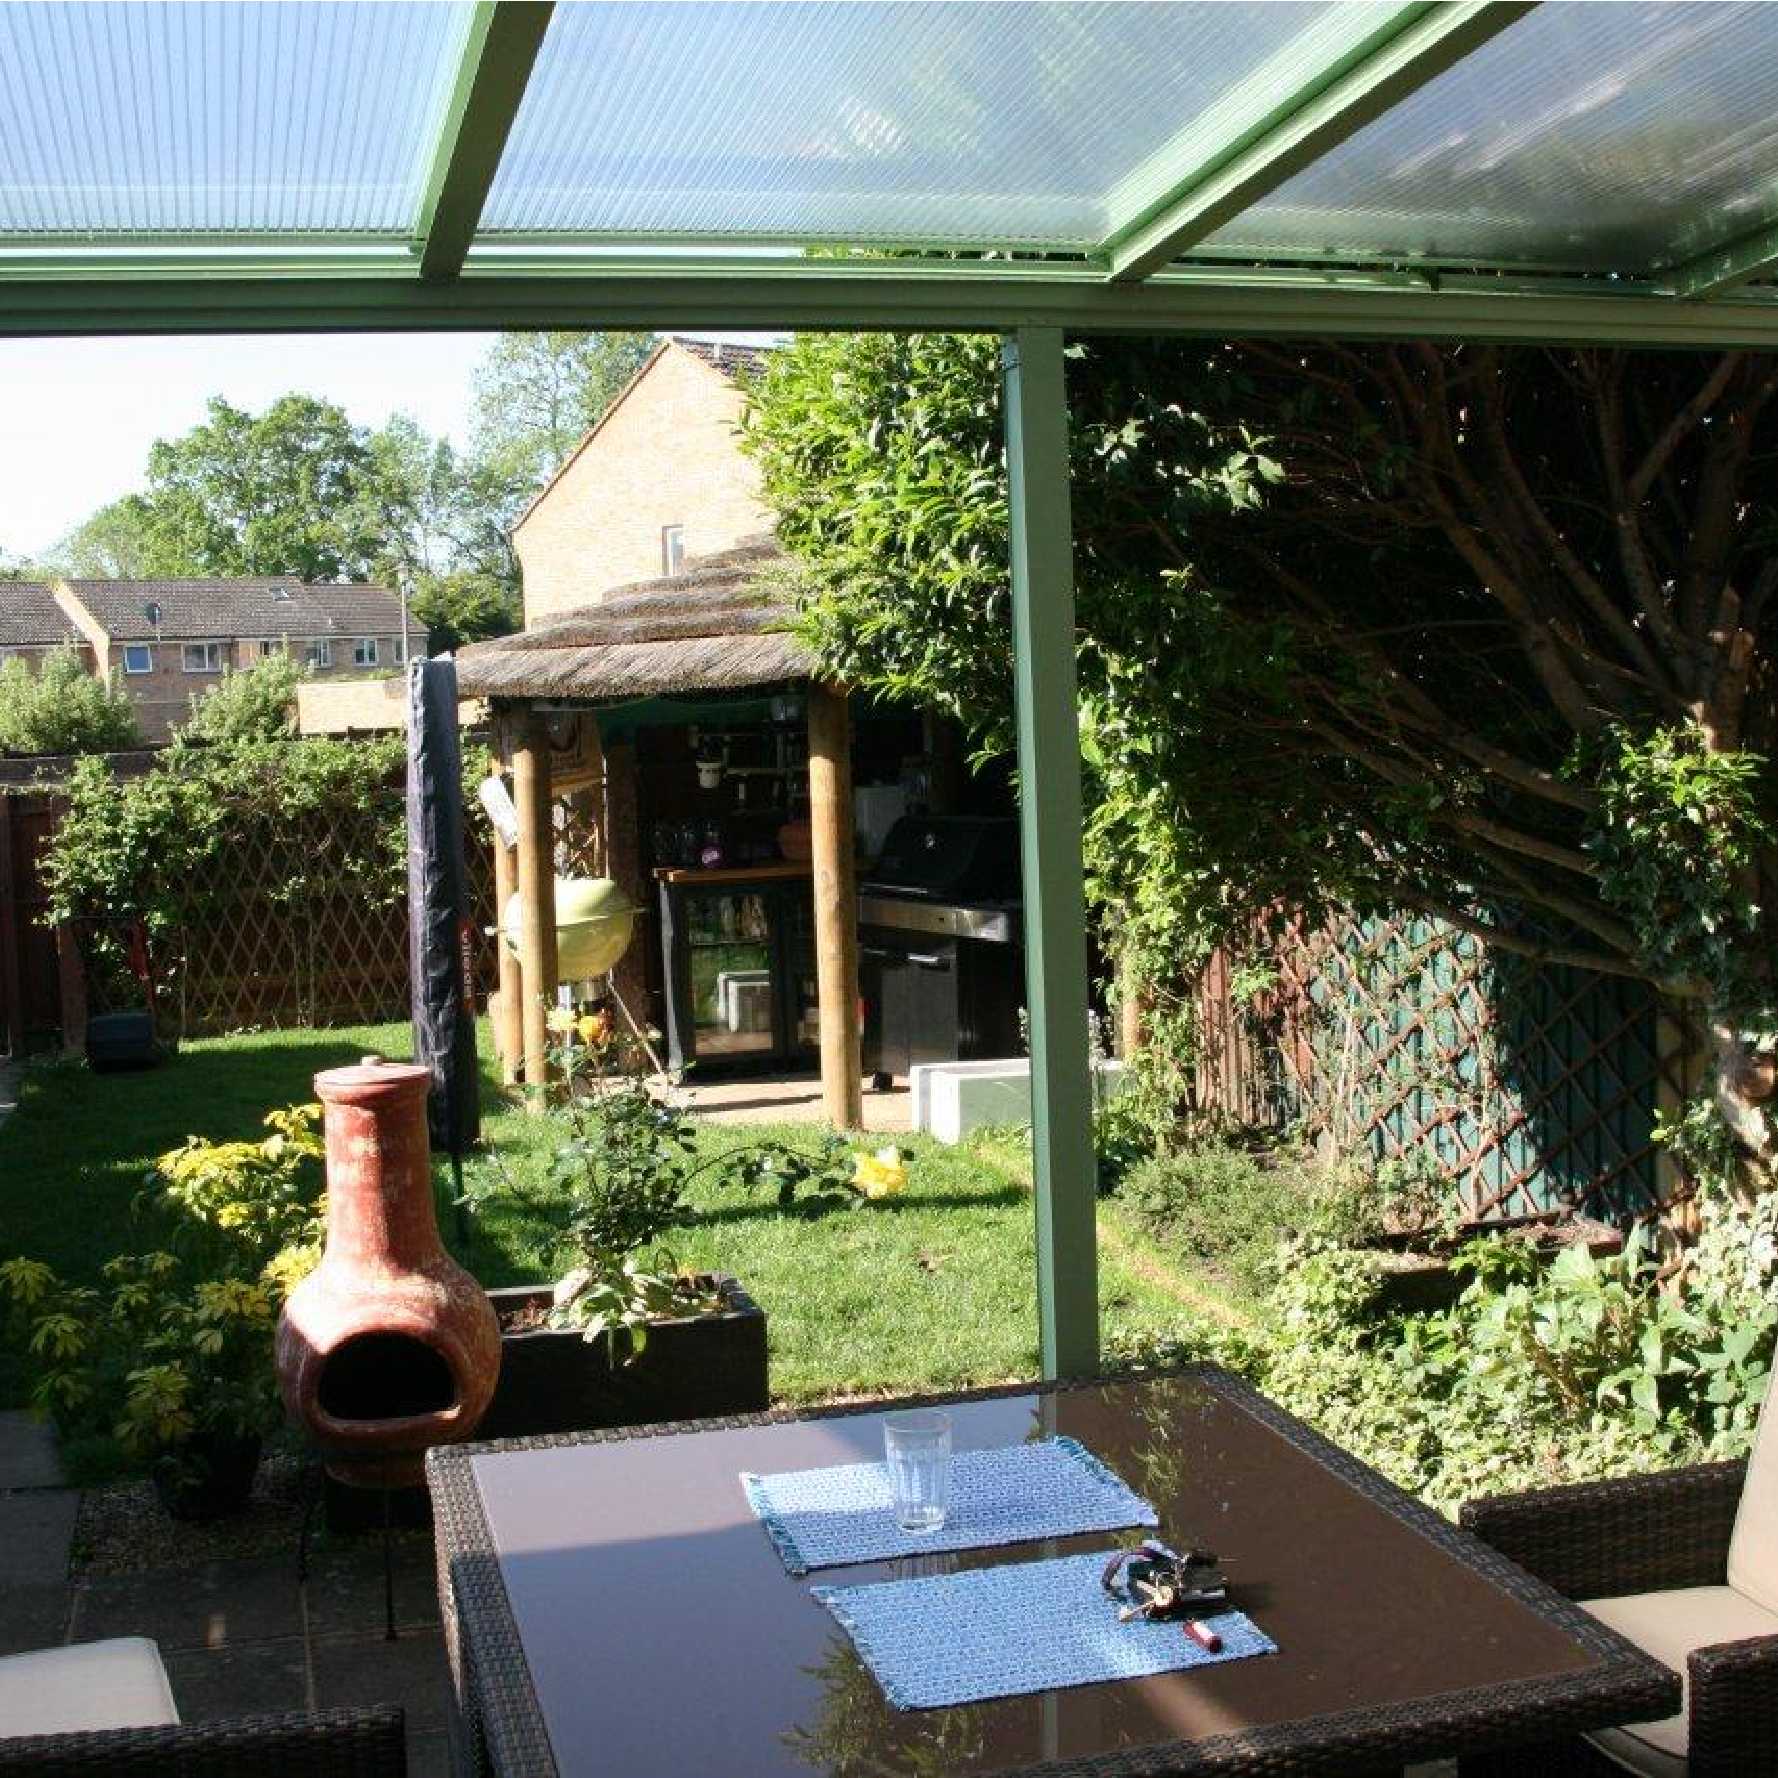 Affordable Omega Smart Lean-To Canopy, White with 16mm Polycarbonate Glazing - 5.9m (W) x 4.5m (P), (3) Supporting Posts